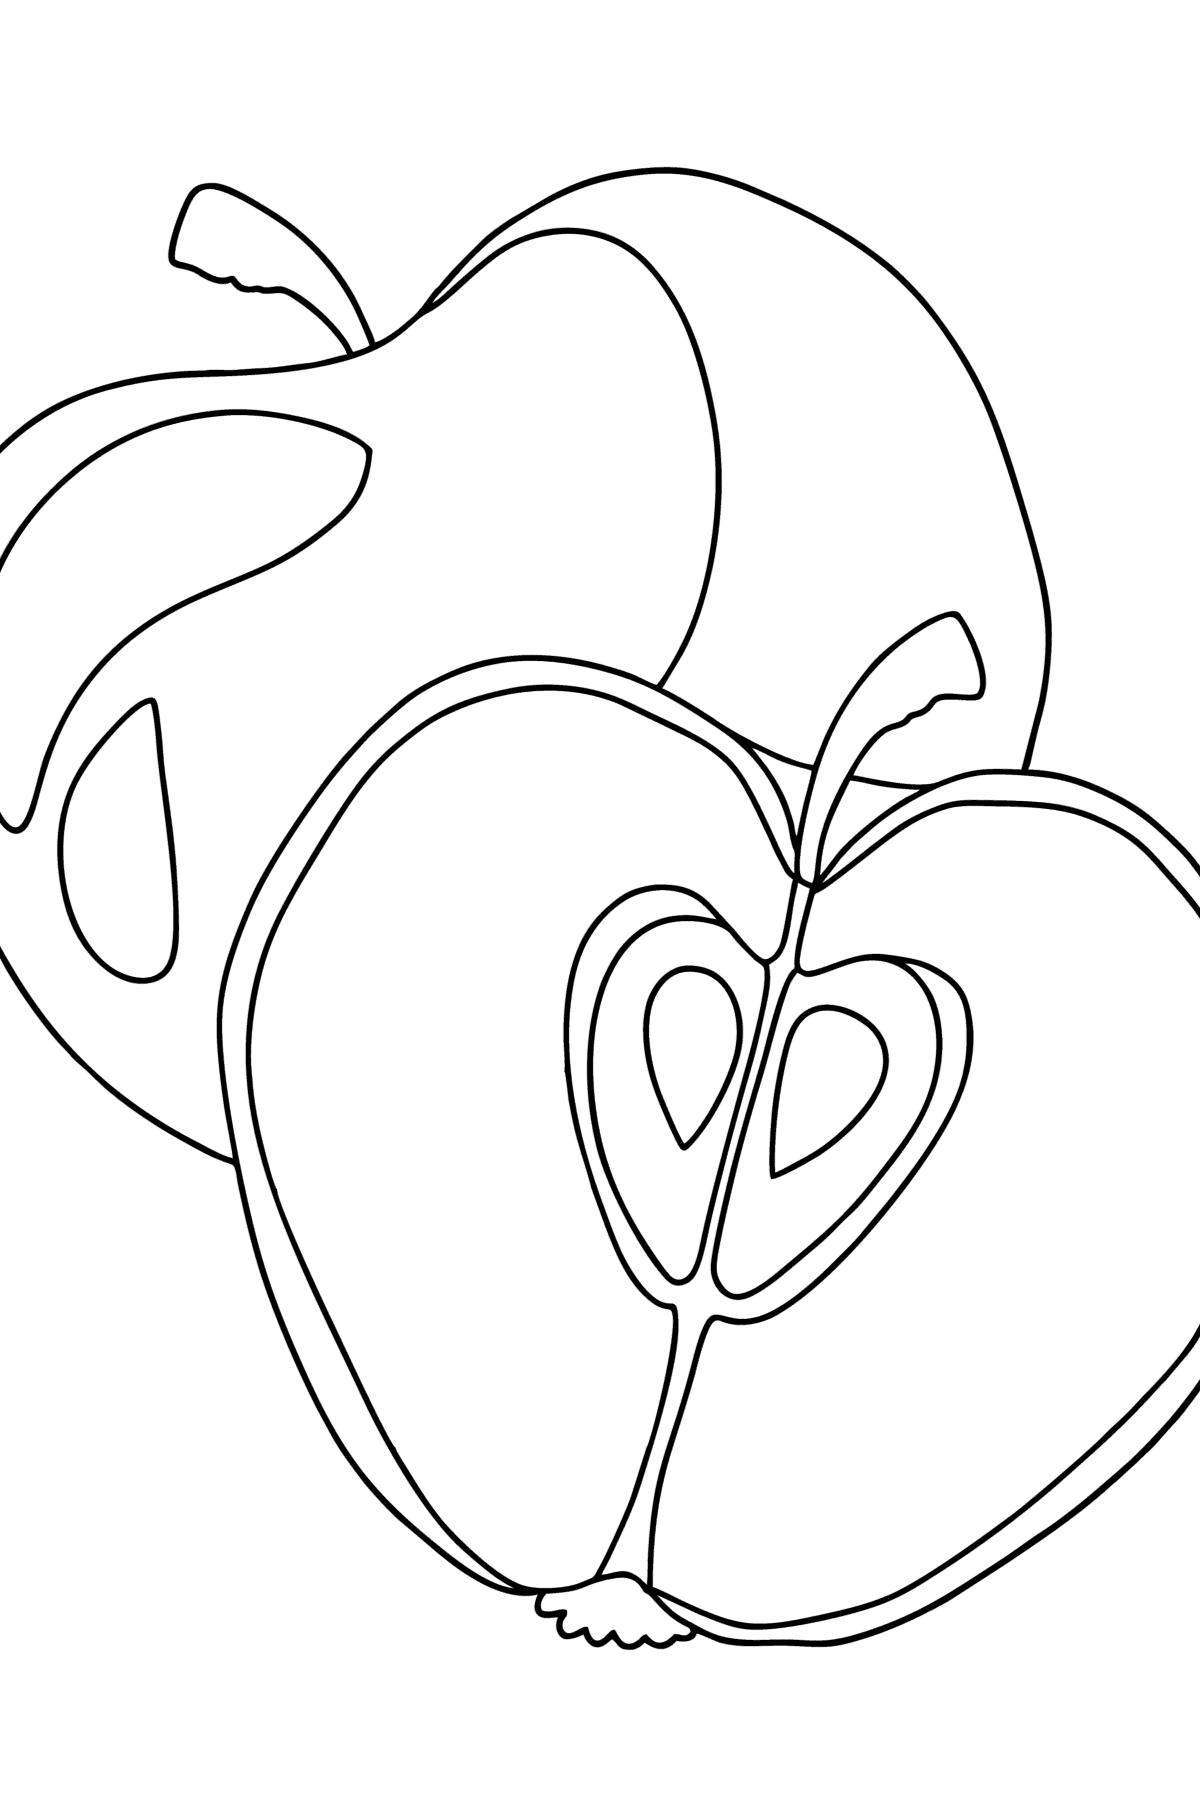 Green apples сolouring page - Coloring Pages for Kids